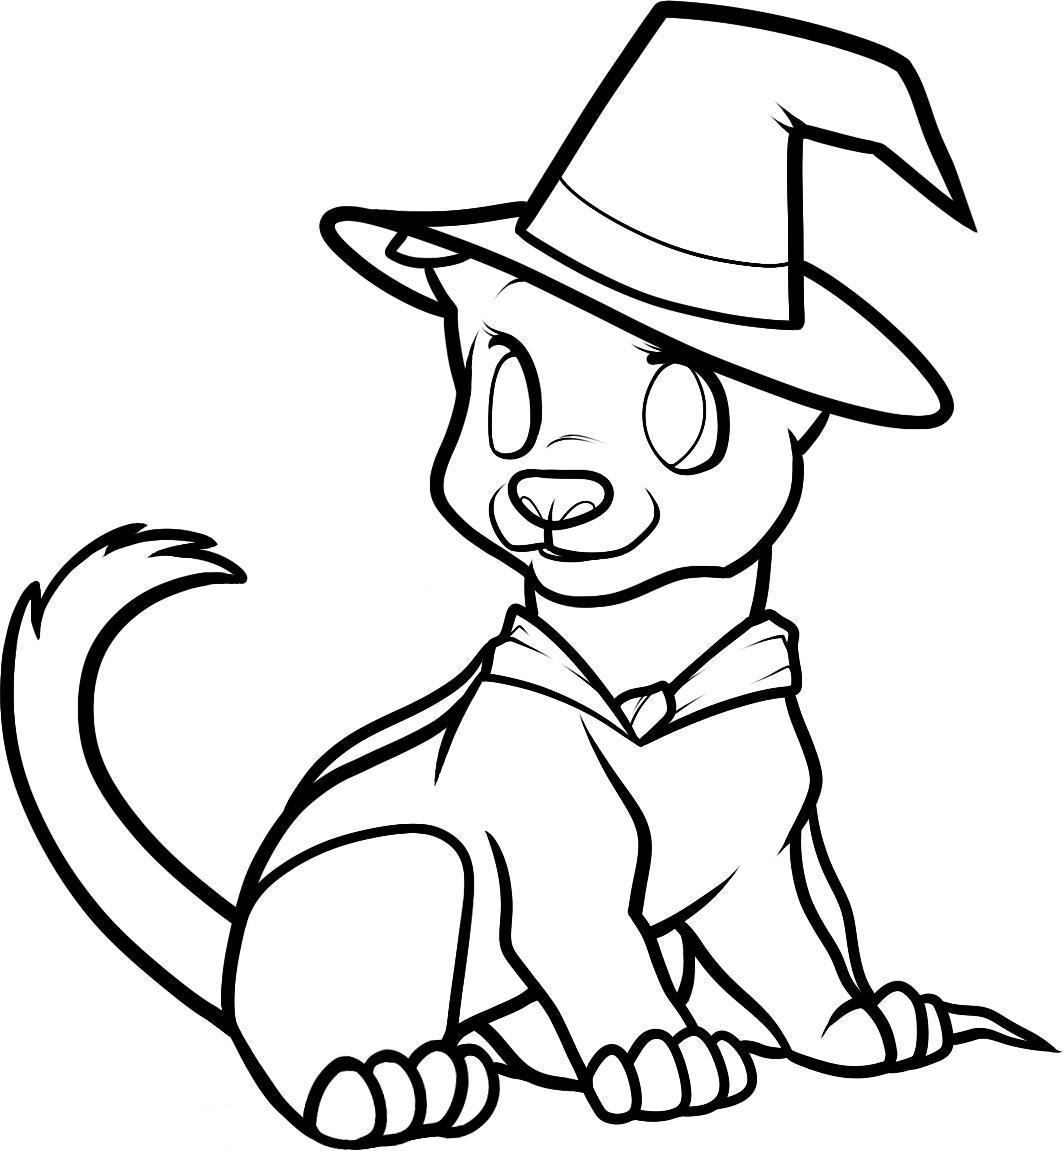 Halloween Wiener Dog Coloring Pages - Get Coloring Pages